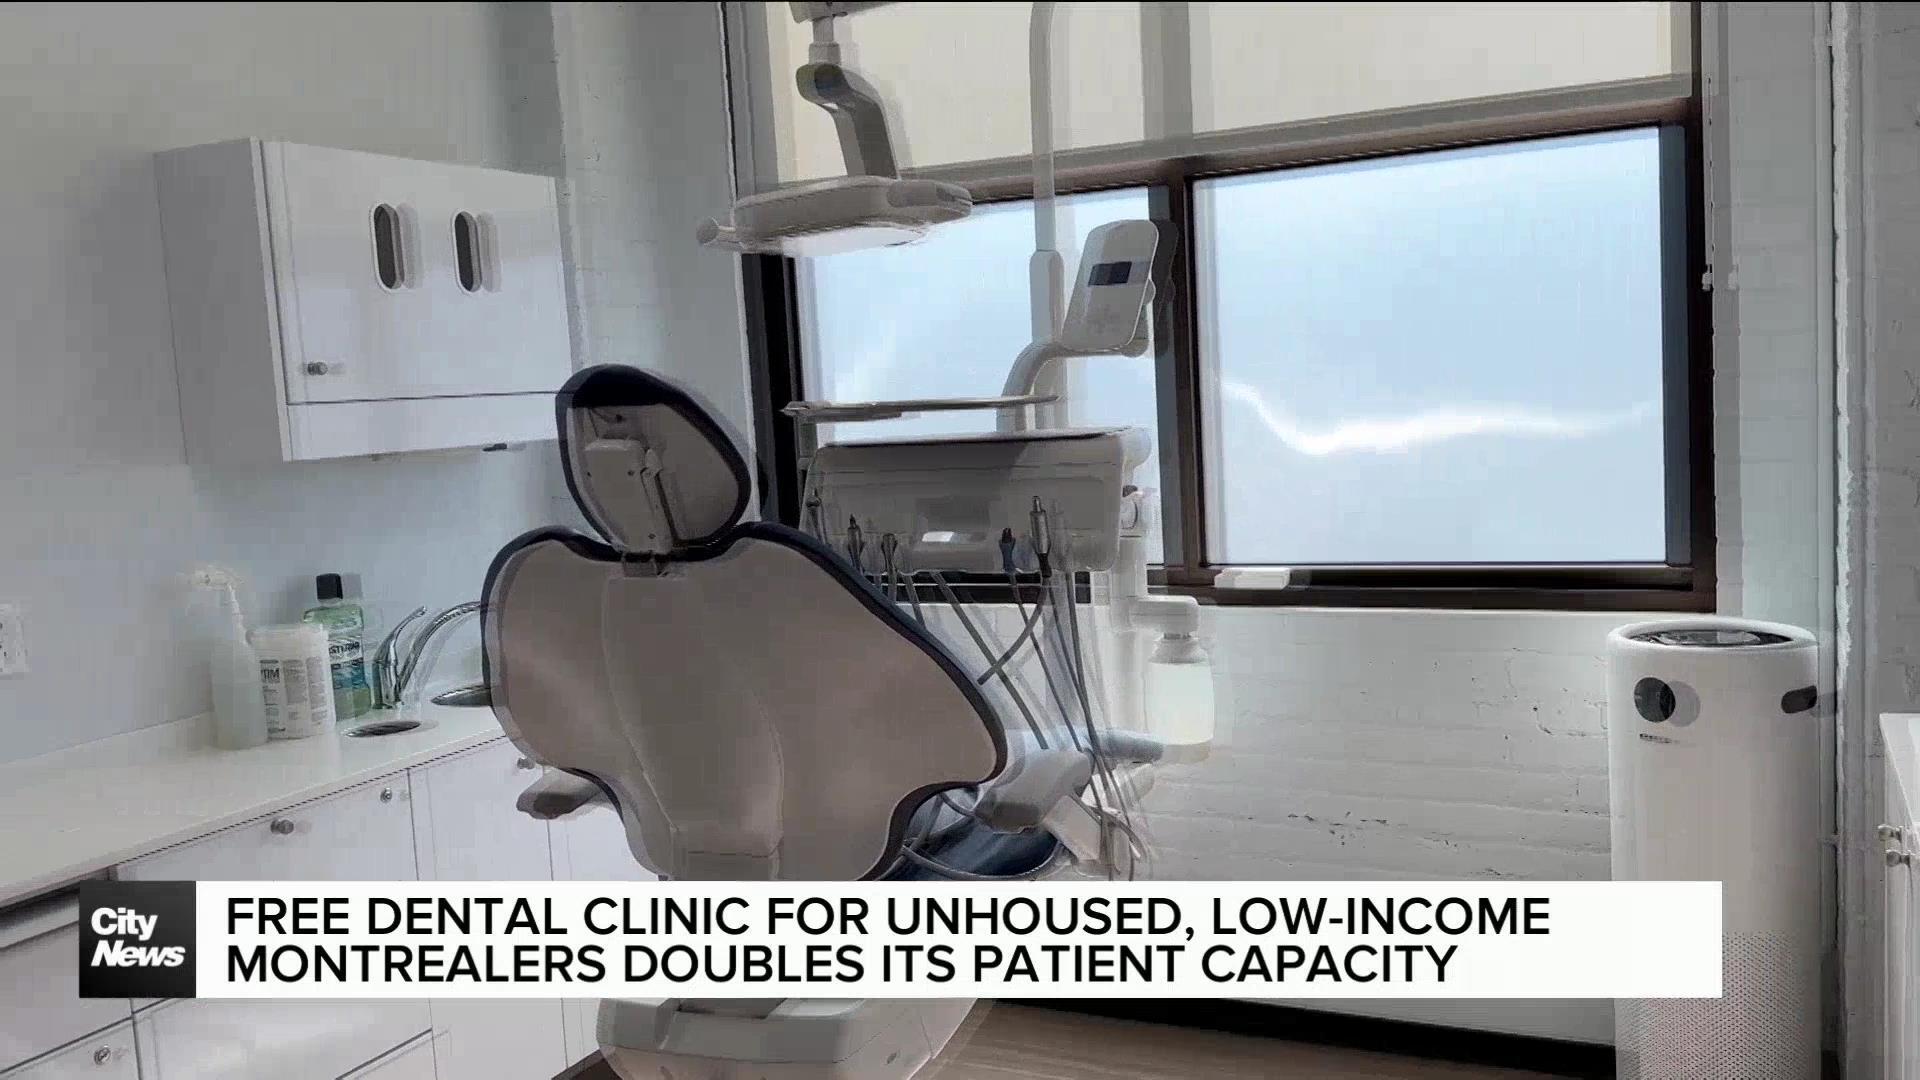 Free dental clinic for unhoused and low-income Montrealers